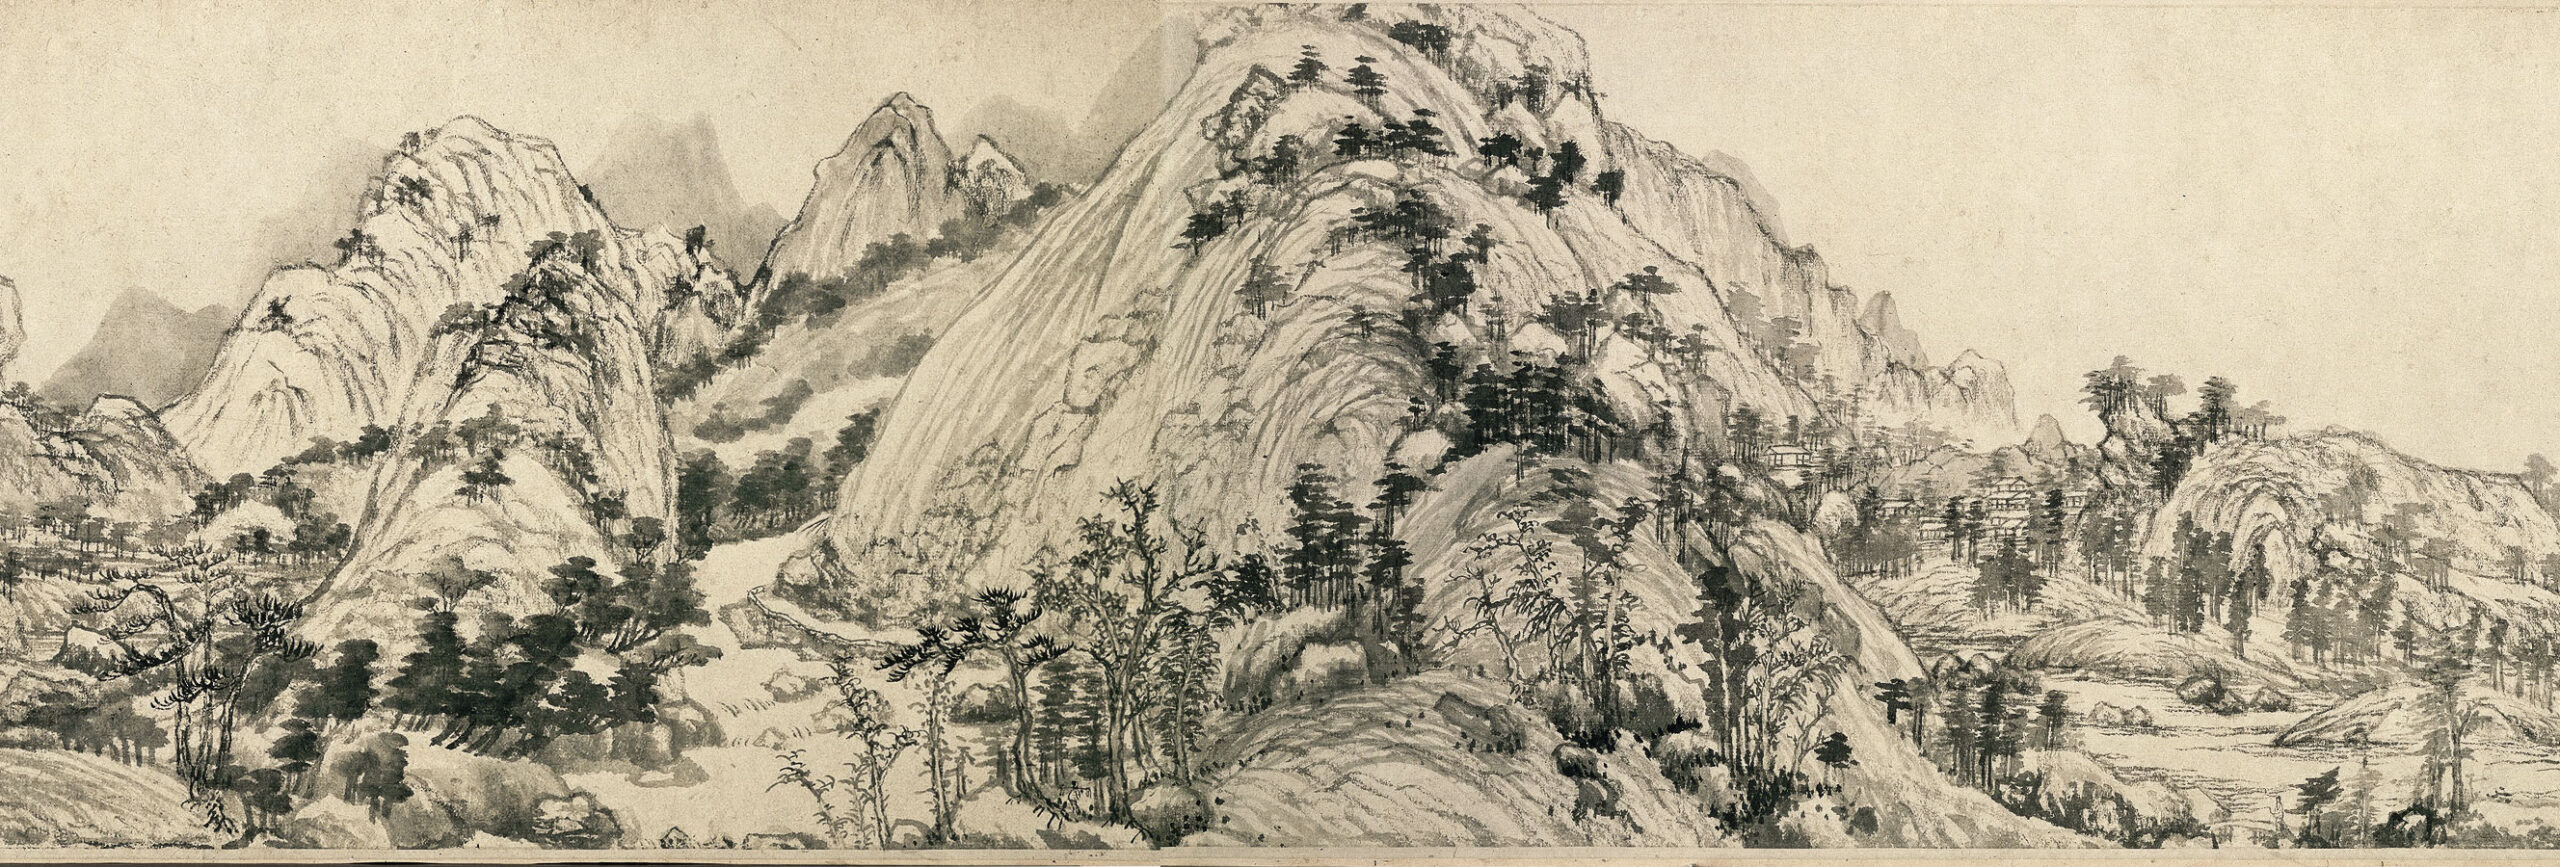 Distant mountains (detail), “The Master Wuyong Scroll,” Huang Gongwang, Dwelling in the Fuchun Mountains, 1350, handscroll, ink on paper, 33 x 636.9 cm (National Palace Museum, Taipei)